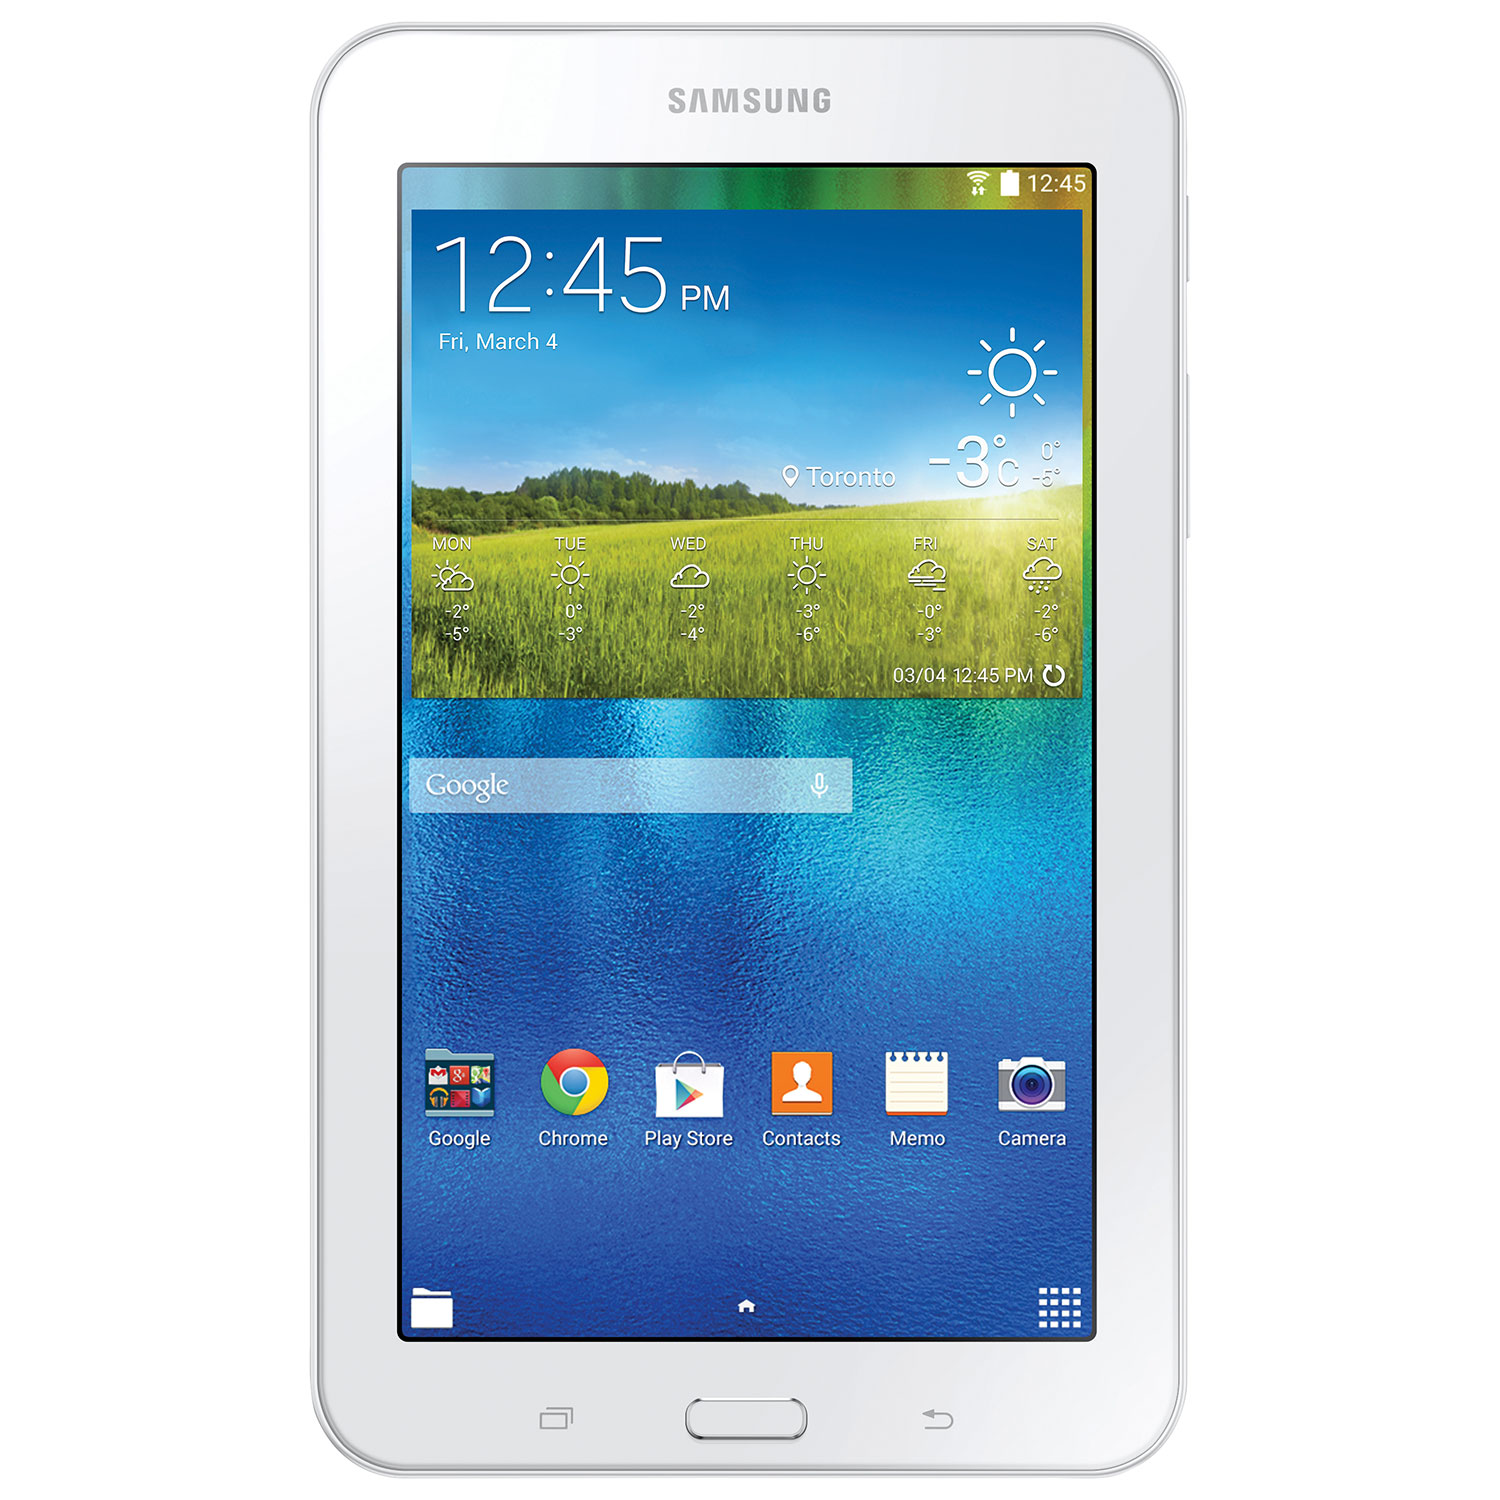 samsung galaxy tab lite android tablet with spreadtrum accent tablette shark quad core processor white tablets best clearance wicker outdoor furniture metal sofa legs battery